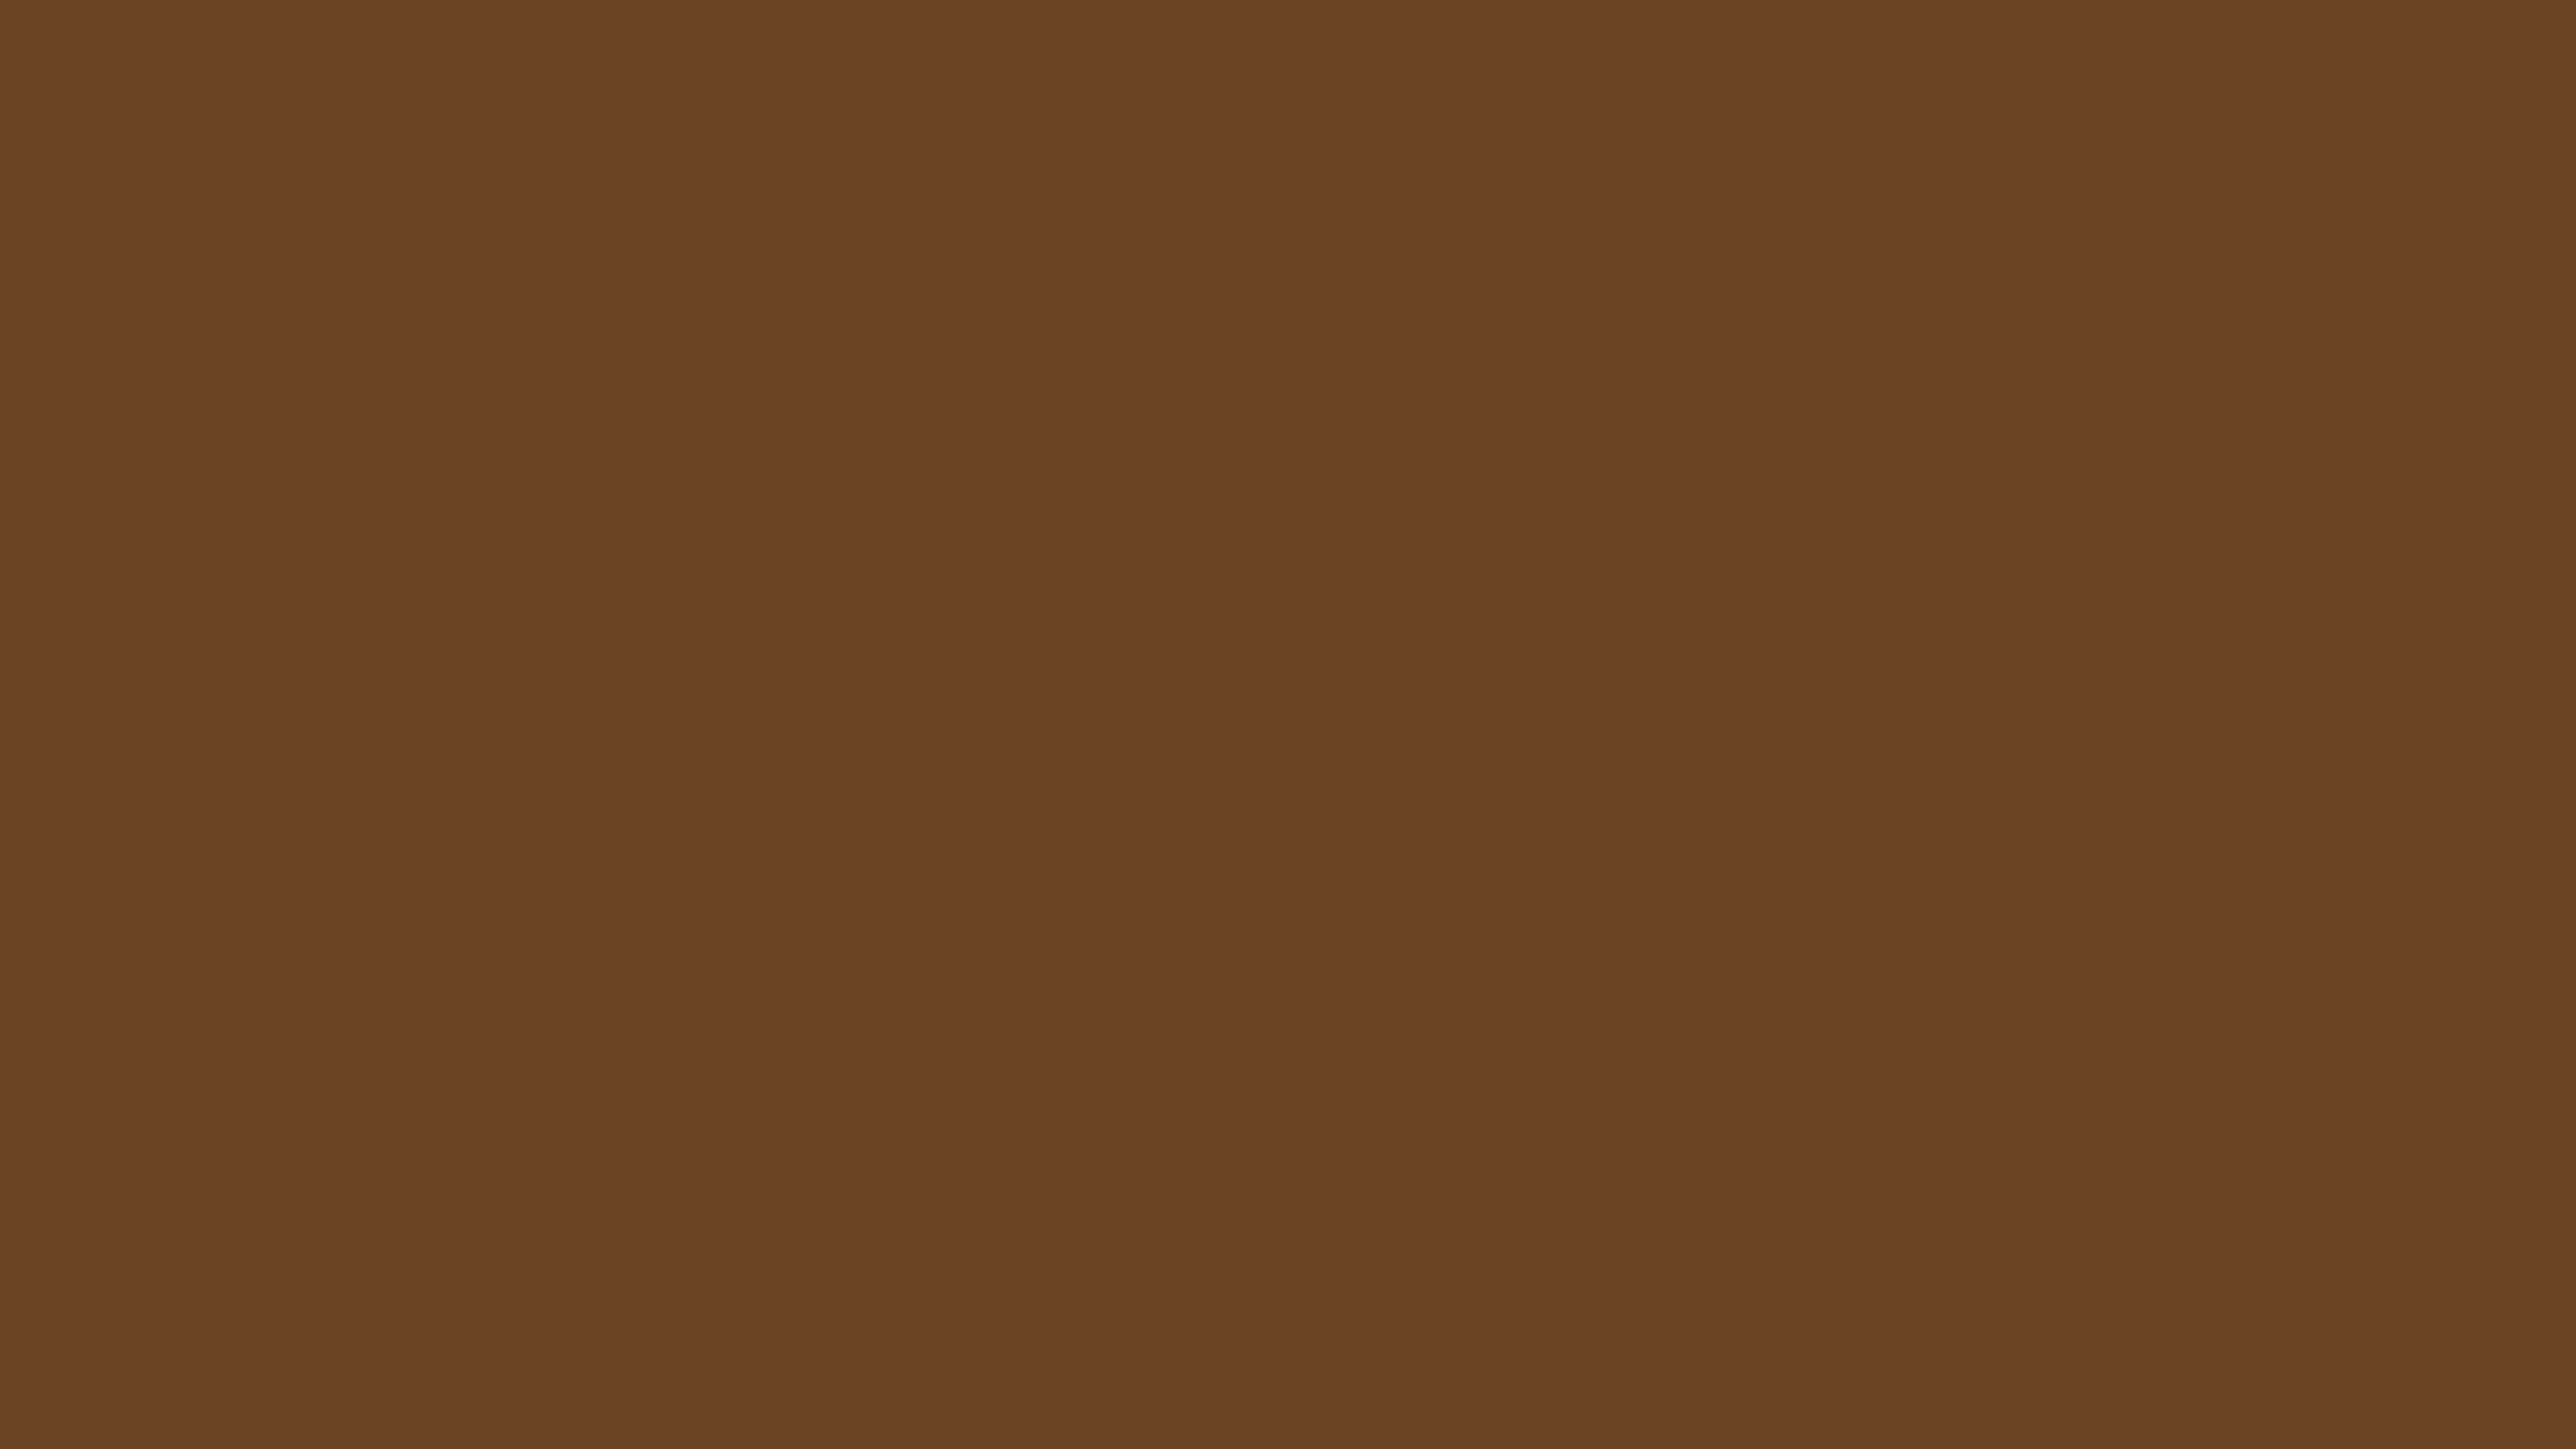 5120x2880 Brown-nose Solid Color Background